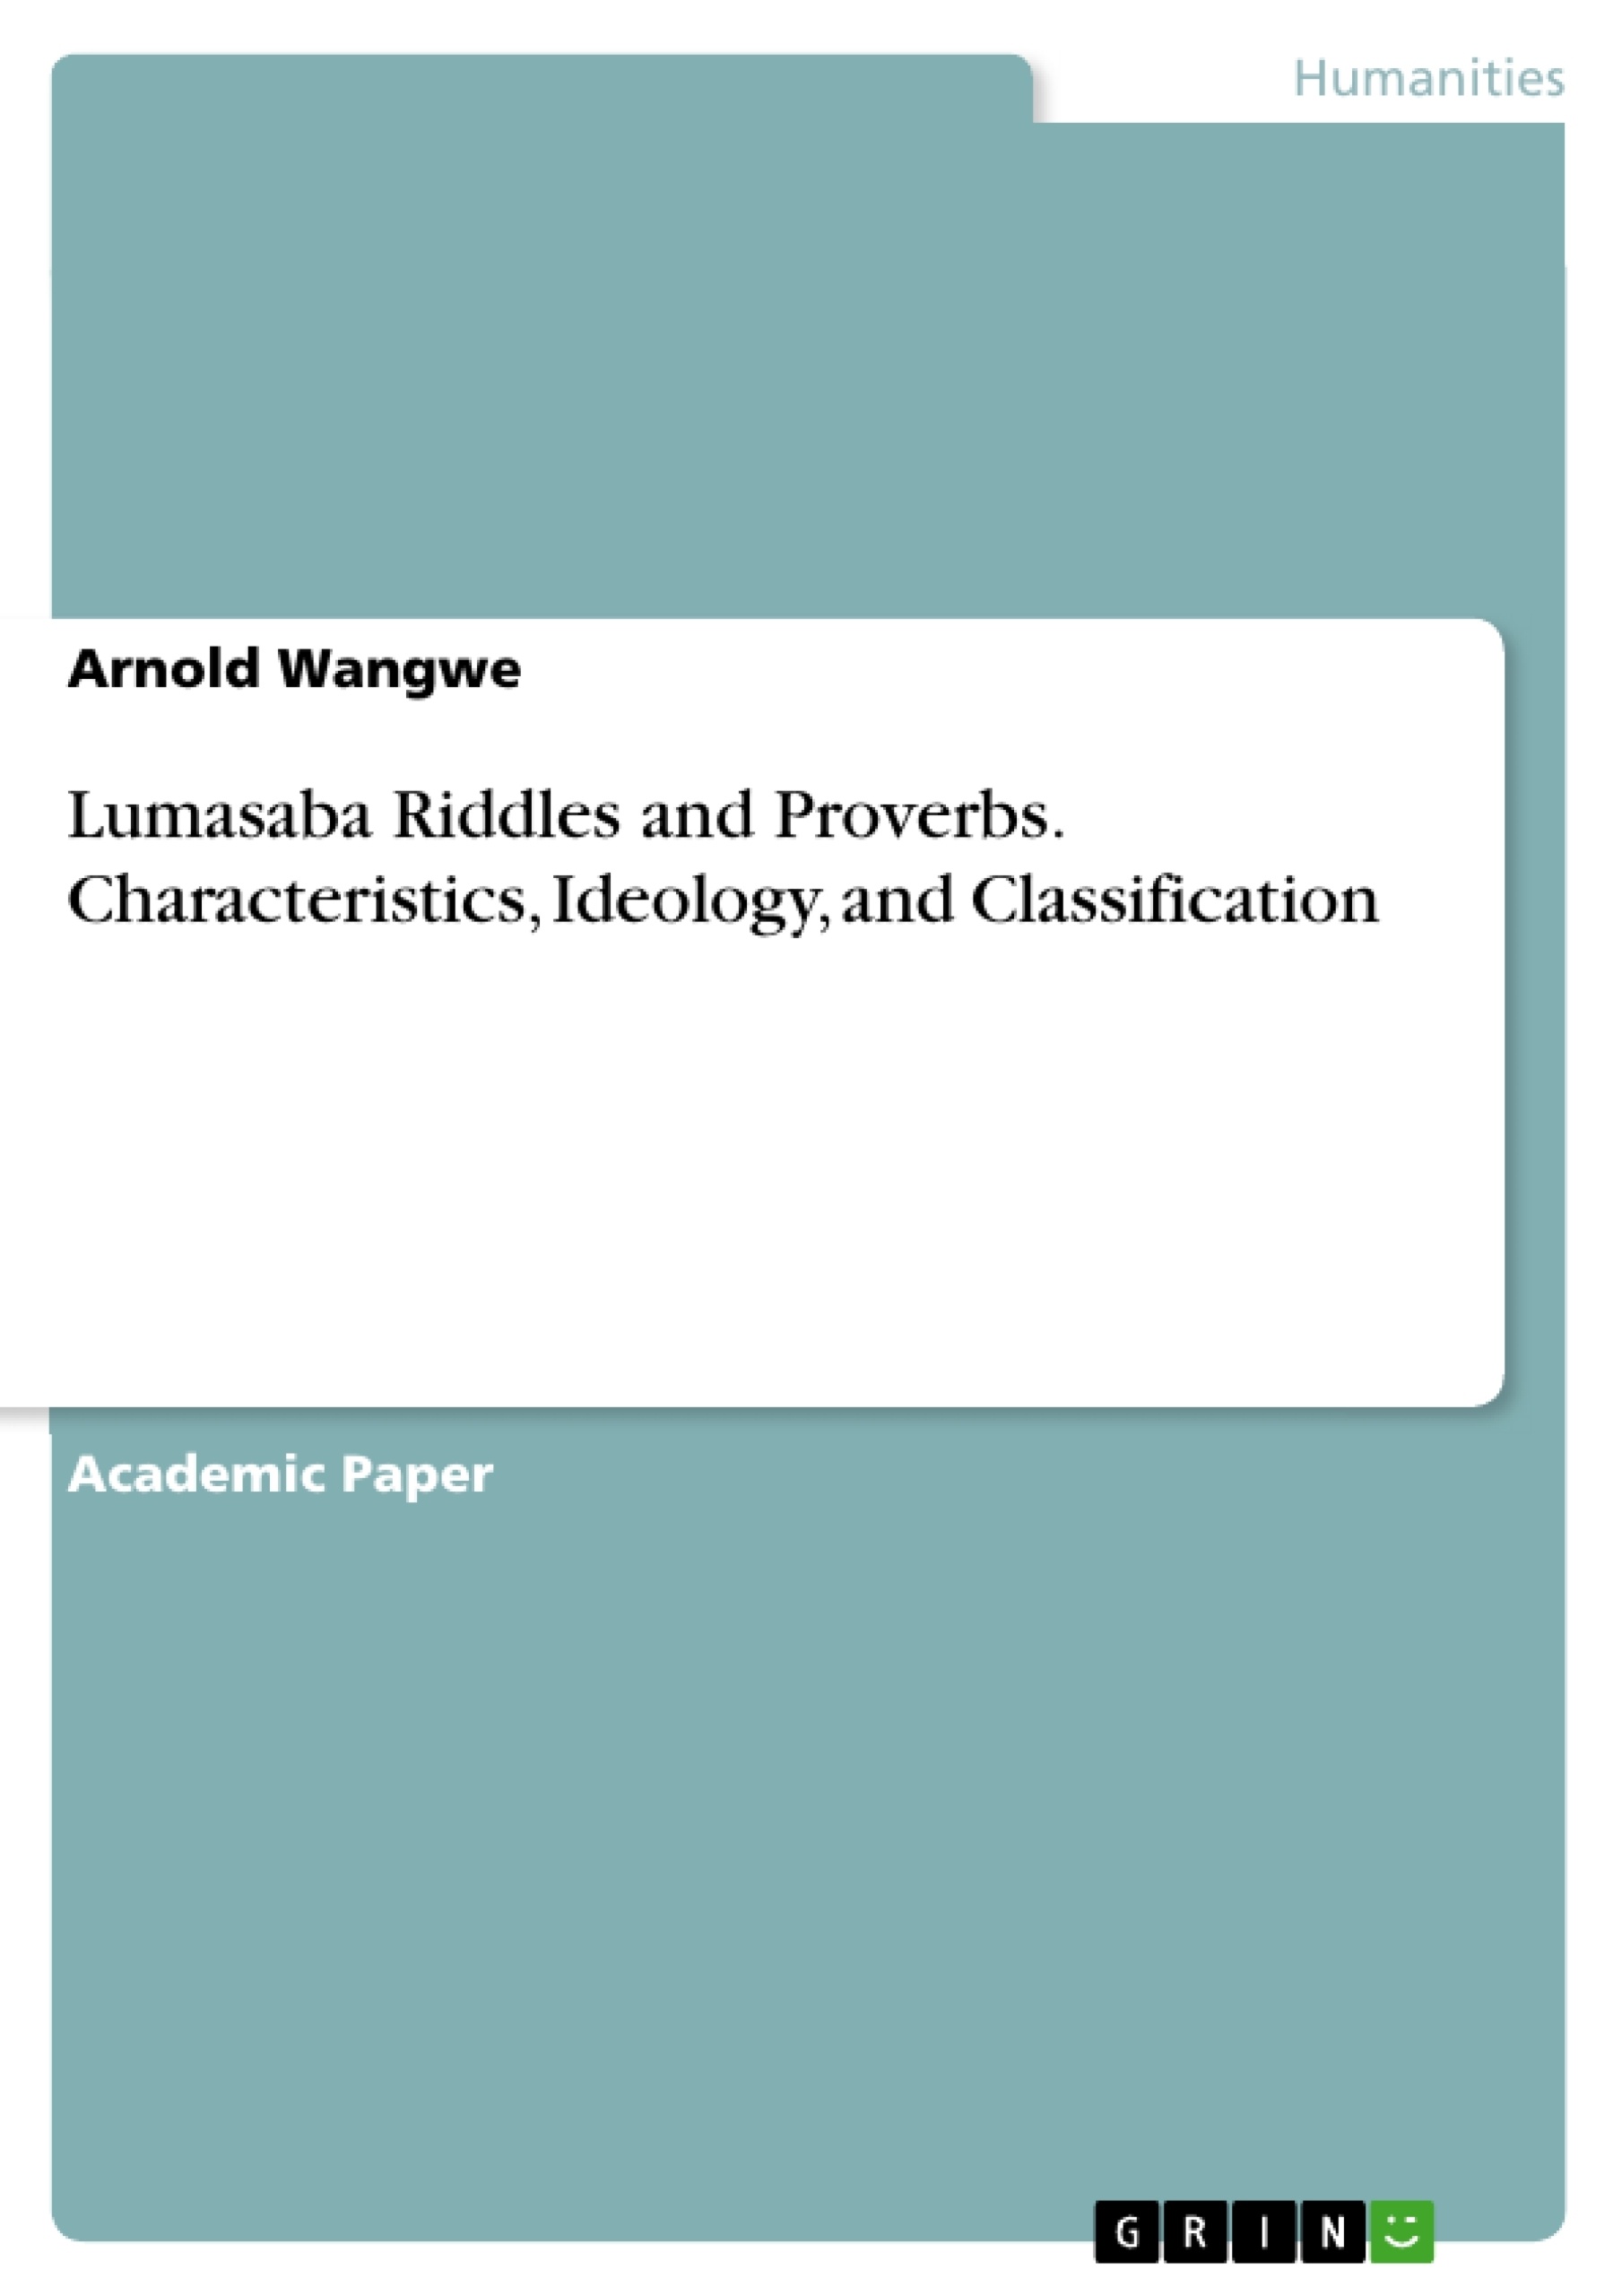 Titre: Lumasaba Riddles and Proverbs. Characteristics, Ideology, and Classification